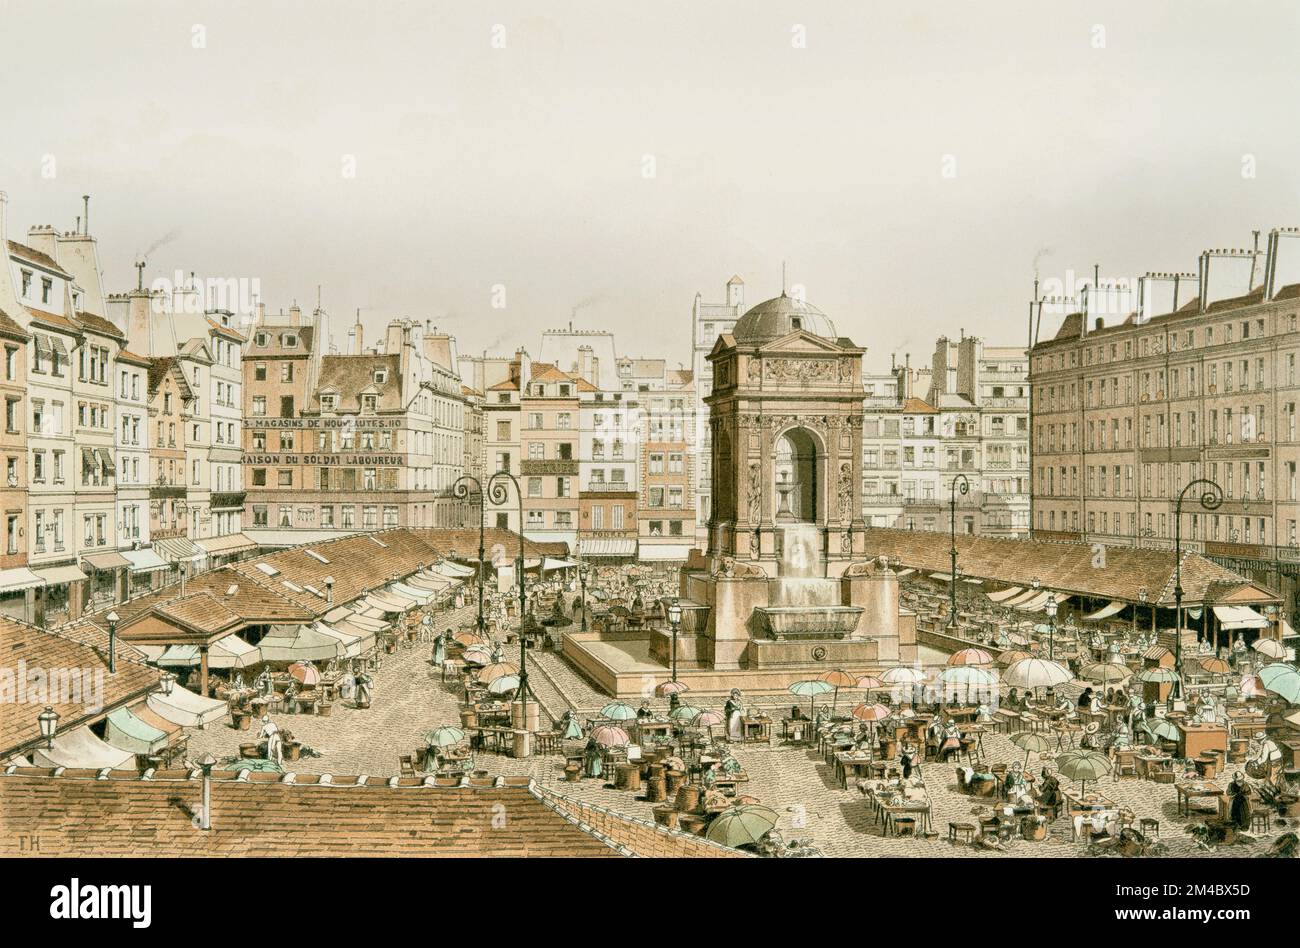 The March of the Innocents in Paris in 1855 (from left to right: rue aux fers, rue Saint Denis, rue Aubry le boucher, fountain of the Innocents, rue Saint Denis, rue du charnier des Innocents) Stock Photo